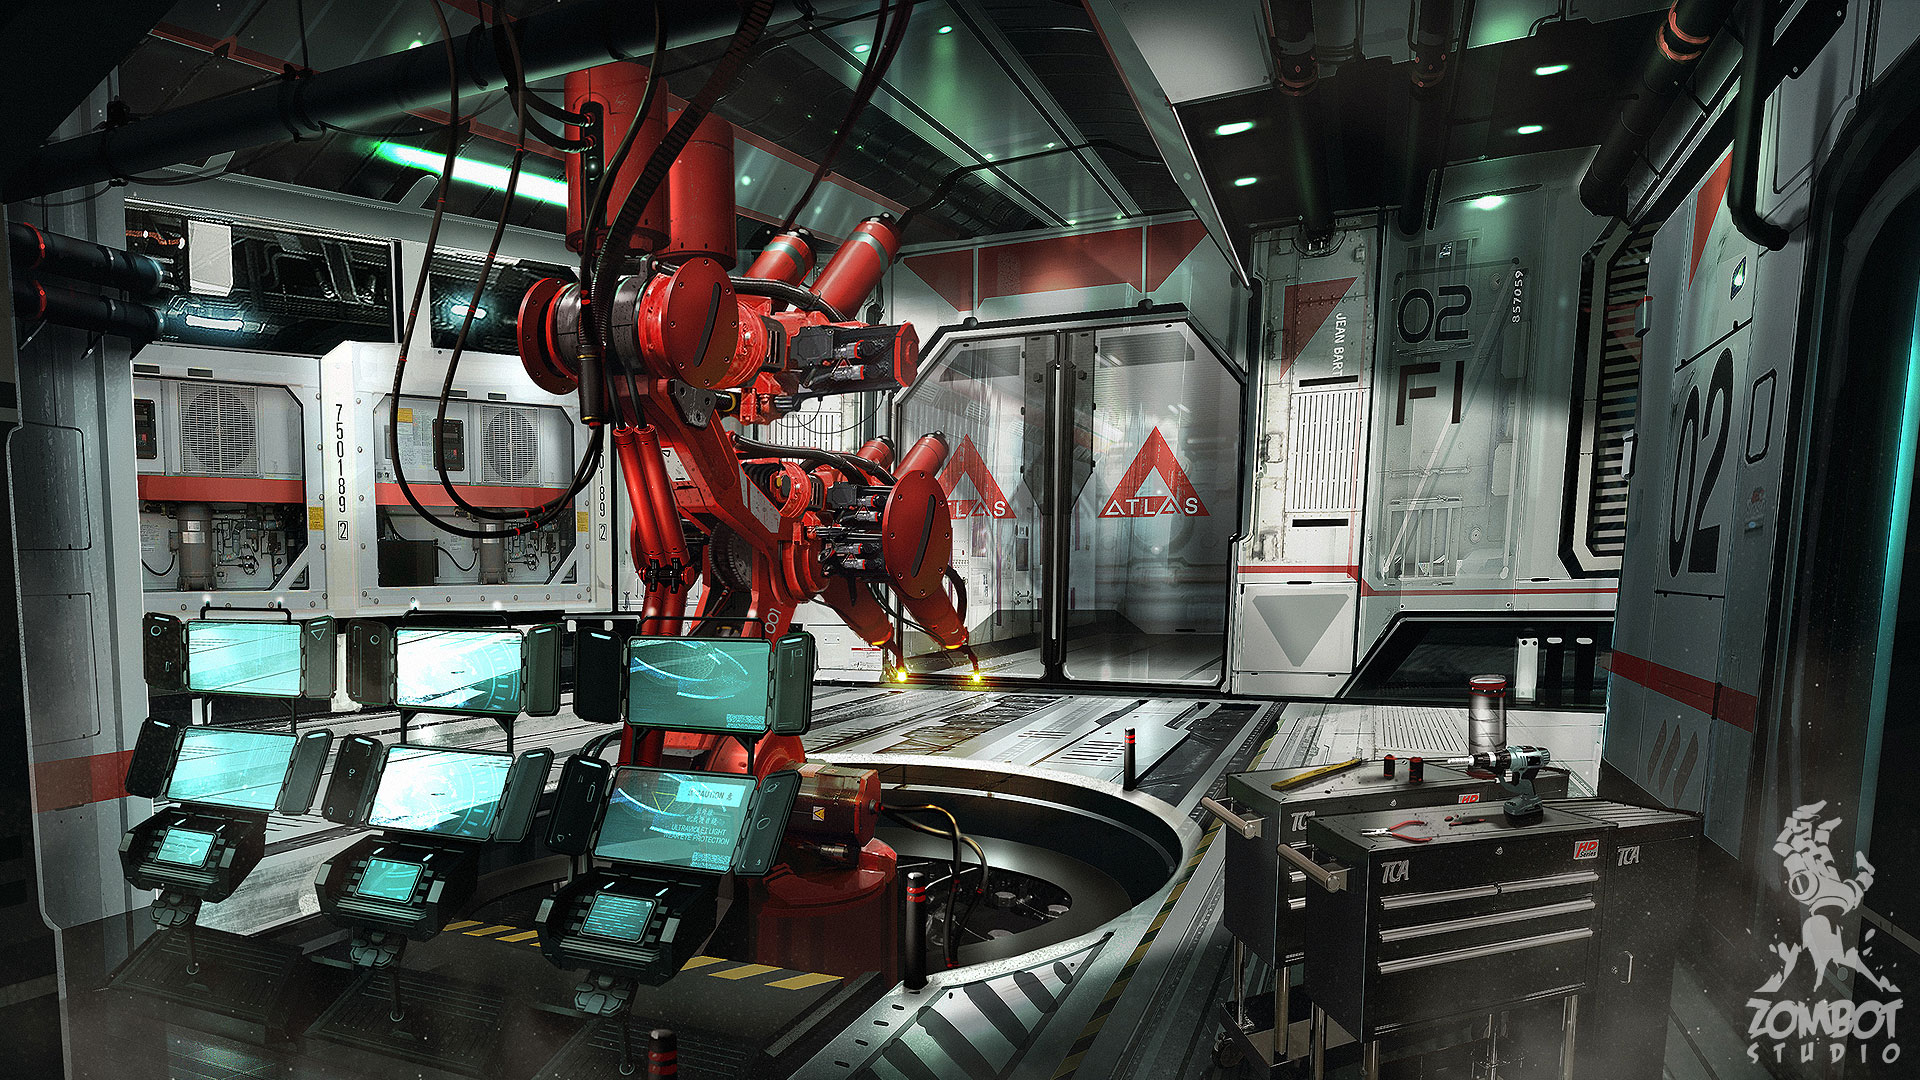 Fine Art: Mechs Punching In Space? You Have My Attention